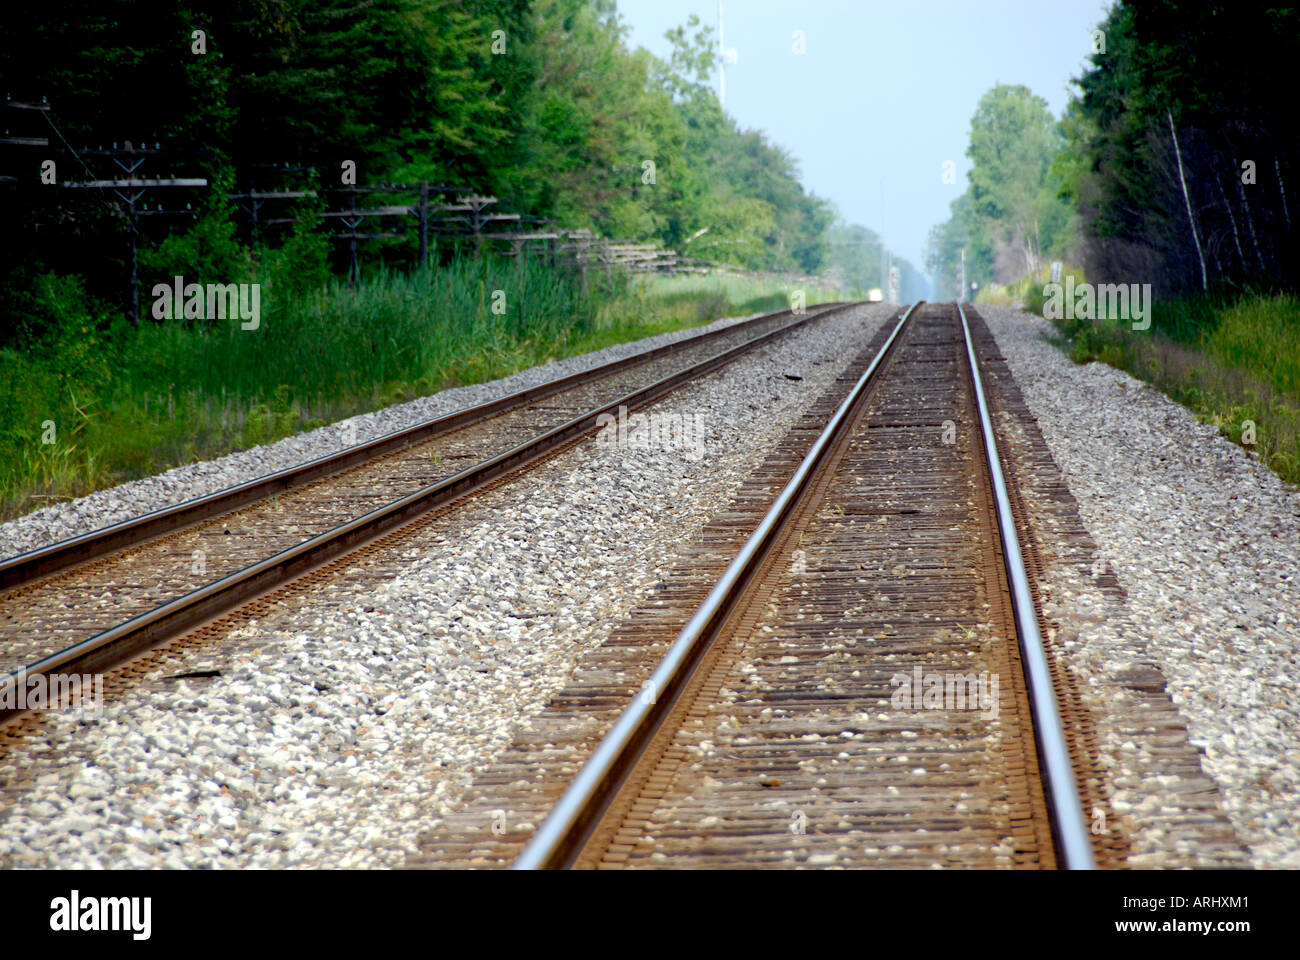 Two sets of railroad tracks lead to infinity Stock Photo